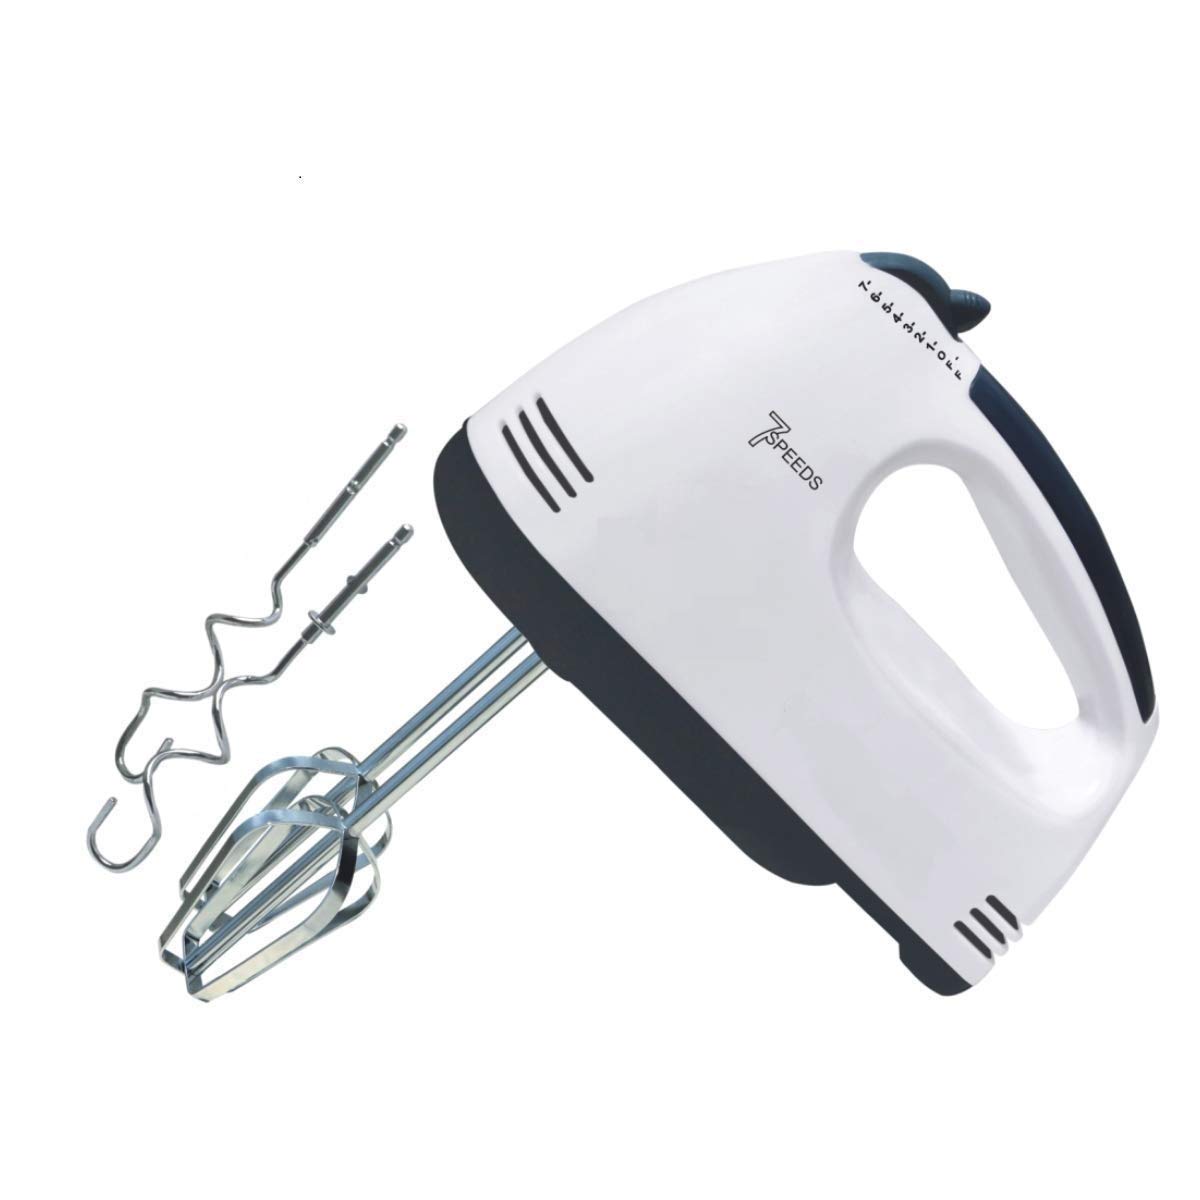 Sportuli Electric Hand Mixer,7 Speed 110V Stainless Steel Handheld Whisk with 2 Beaters and 2 Dough Hooks for Whipping,Mixing Cookies Brownies 